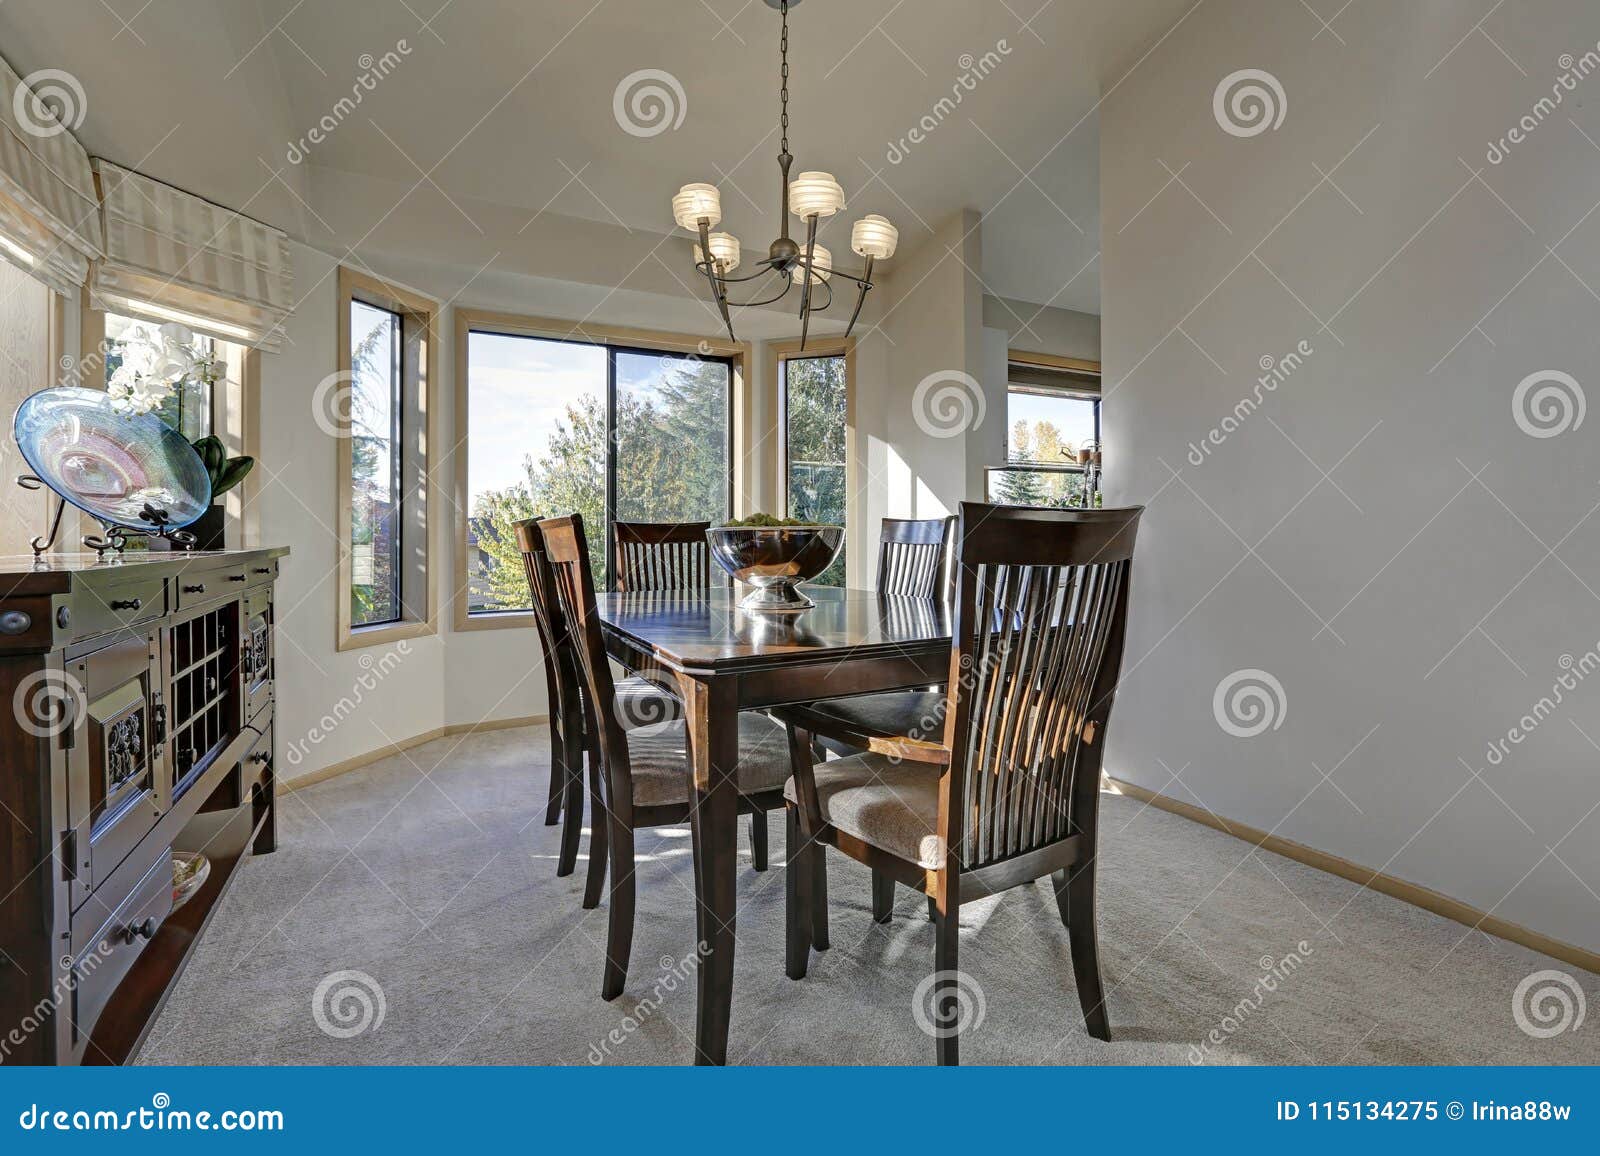 Inviting Light Filled Dining Room With Wood Dining Table Stock Image Image Of Empty American 115134275